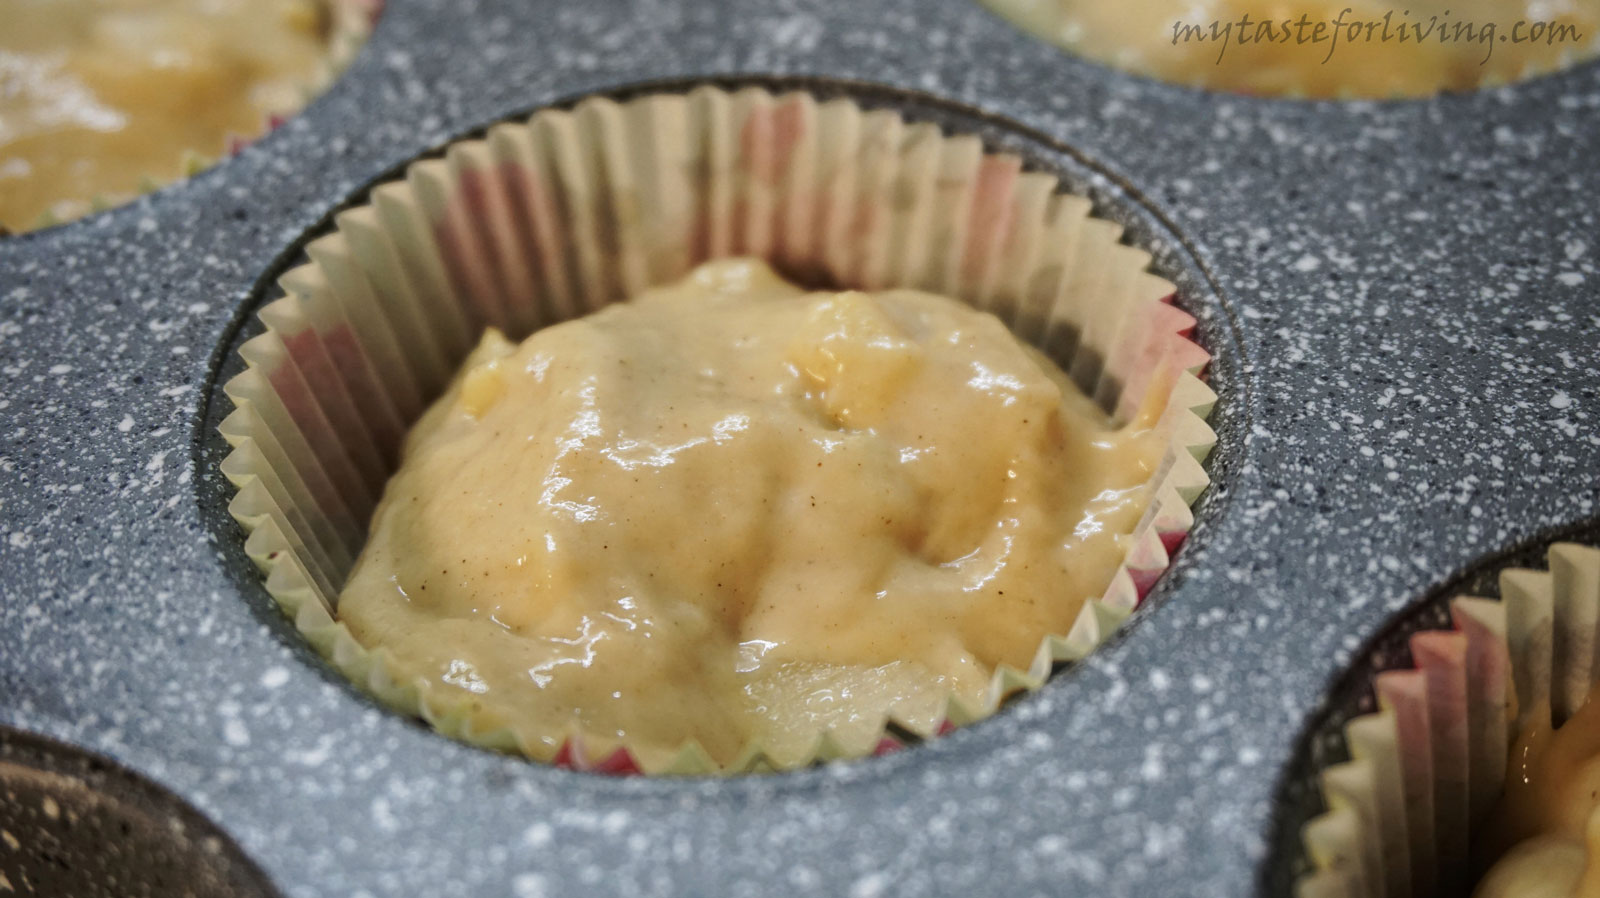 Ginger Pear Muffins - a combination of scents that provokes the senses.